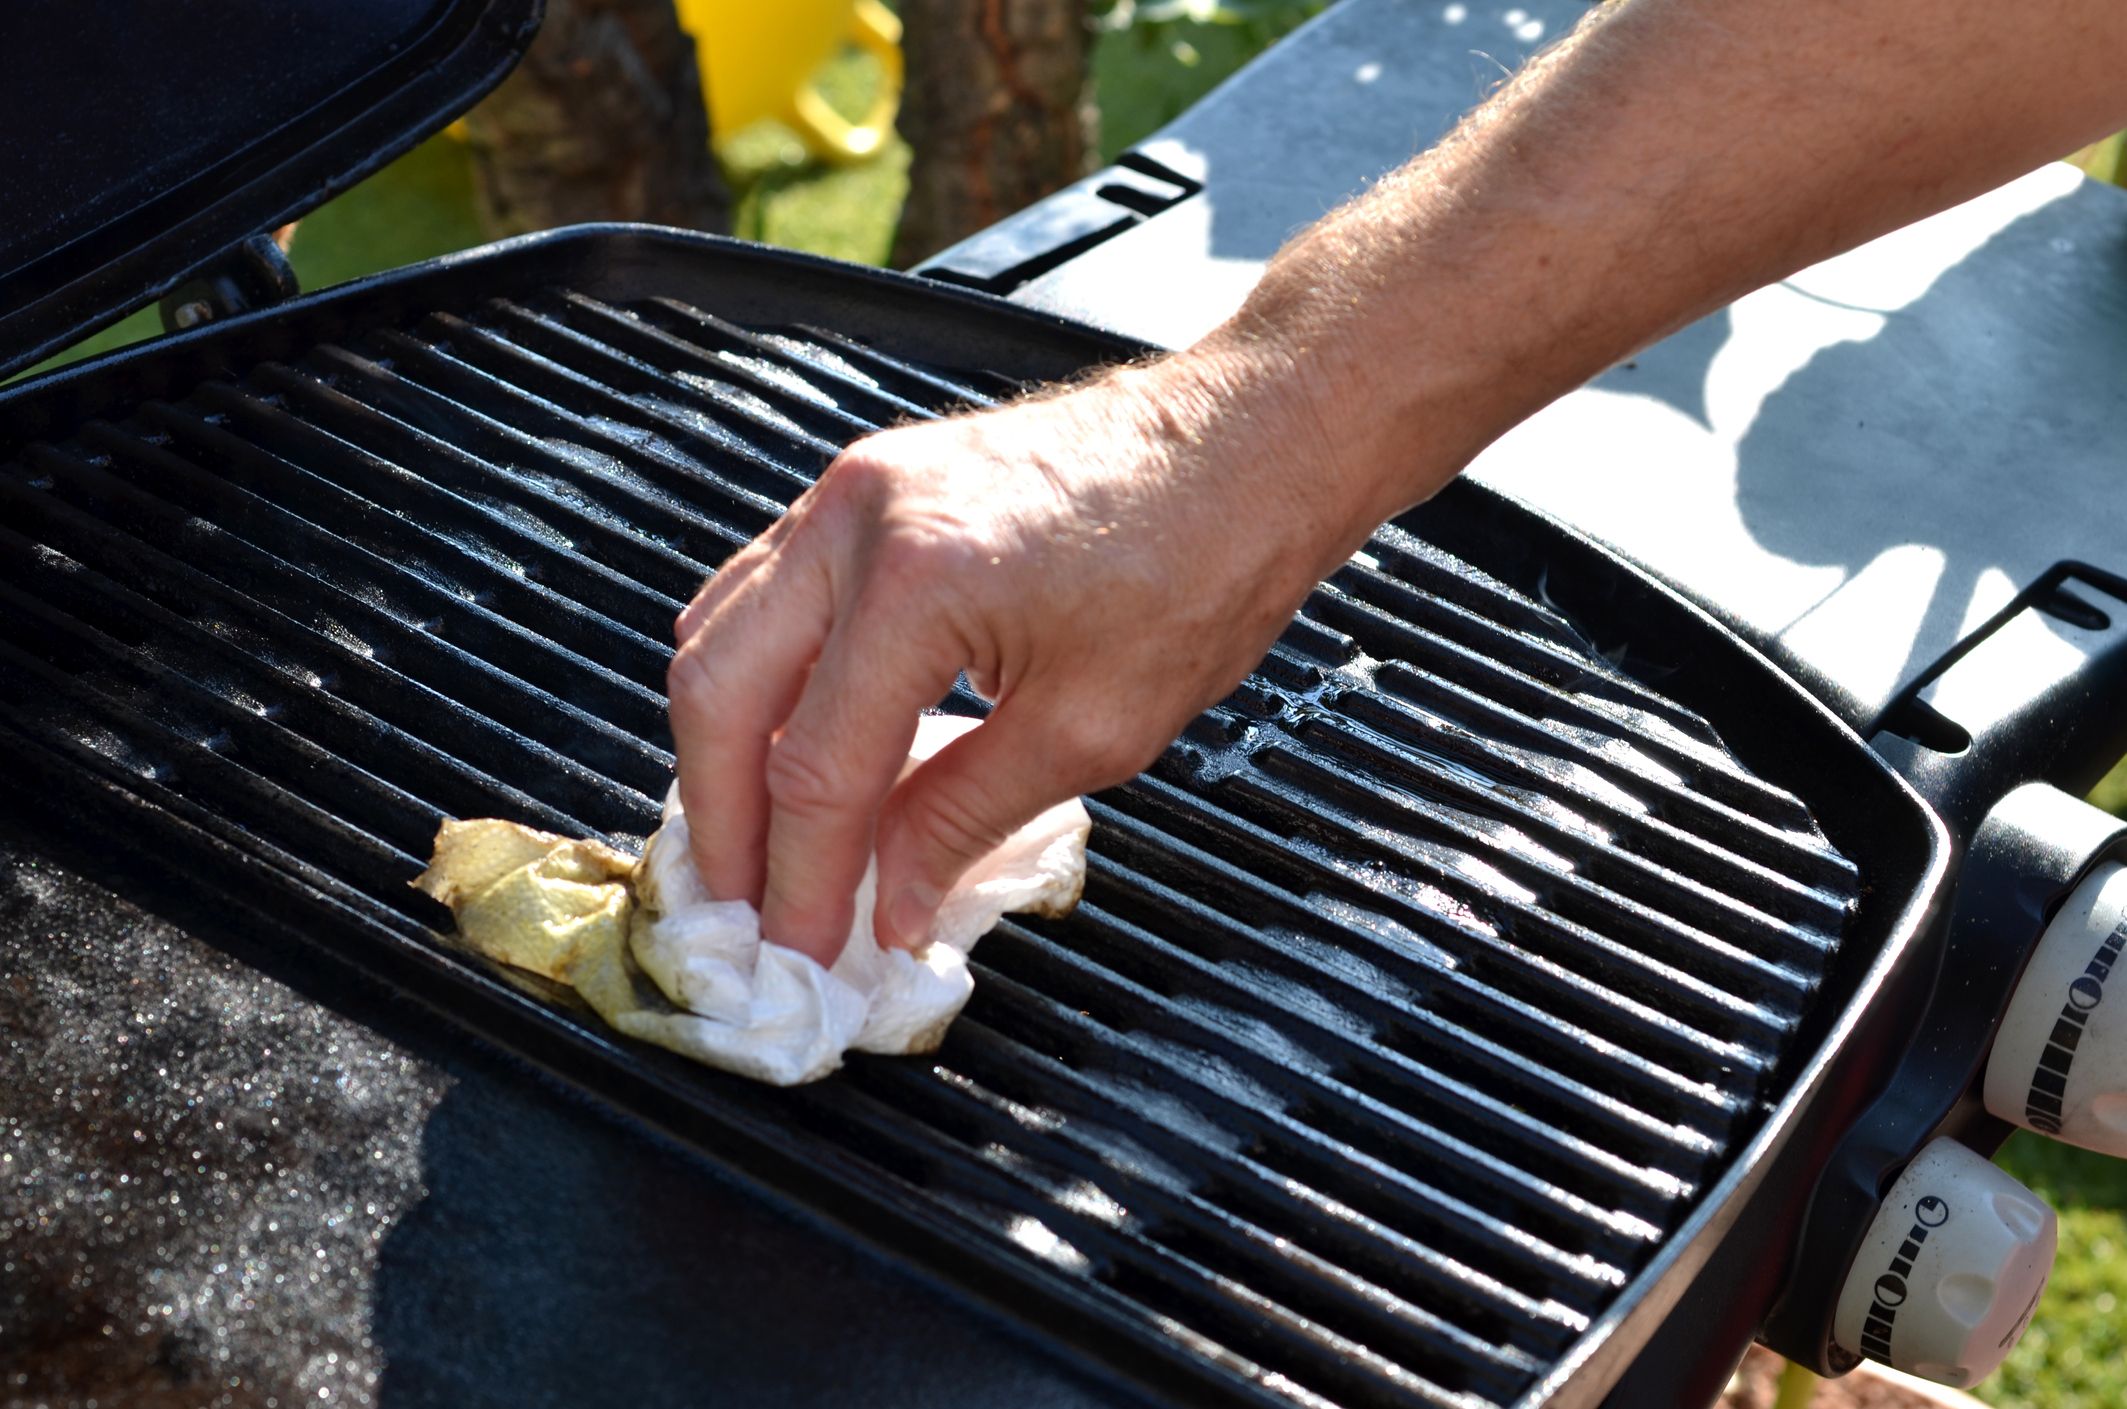 How to clean grill grates? – 4 Best Ways